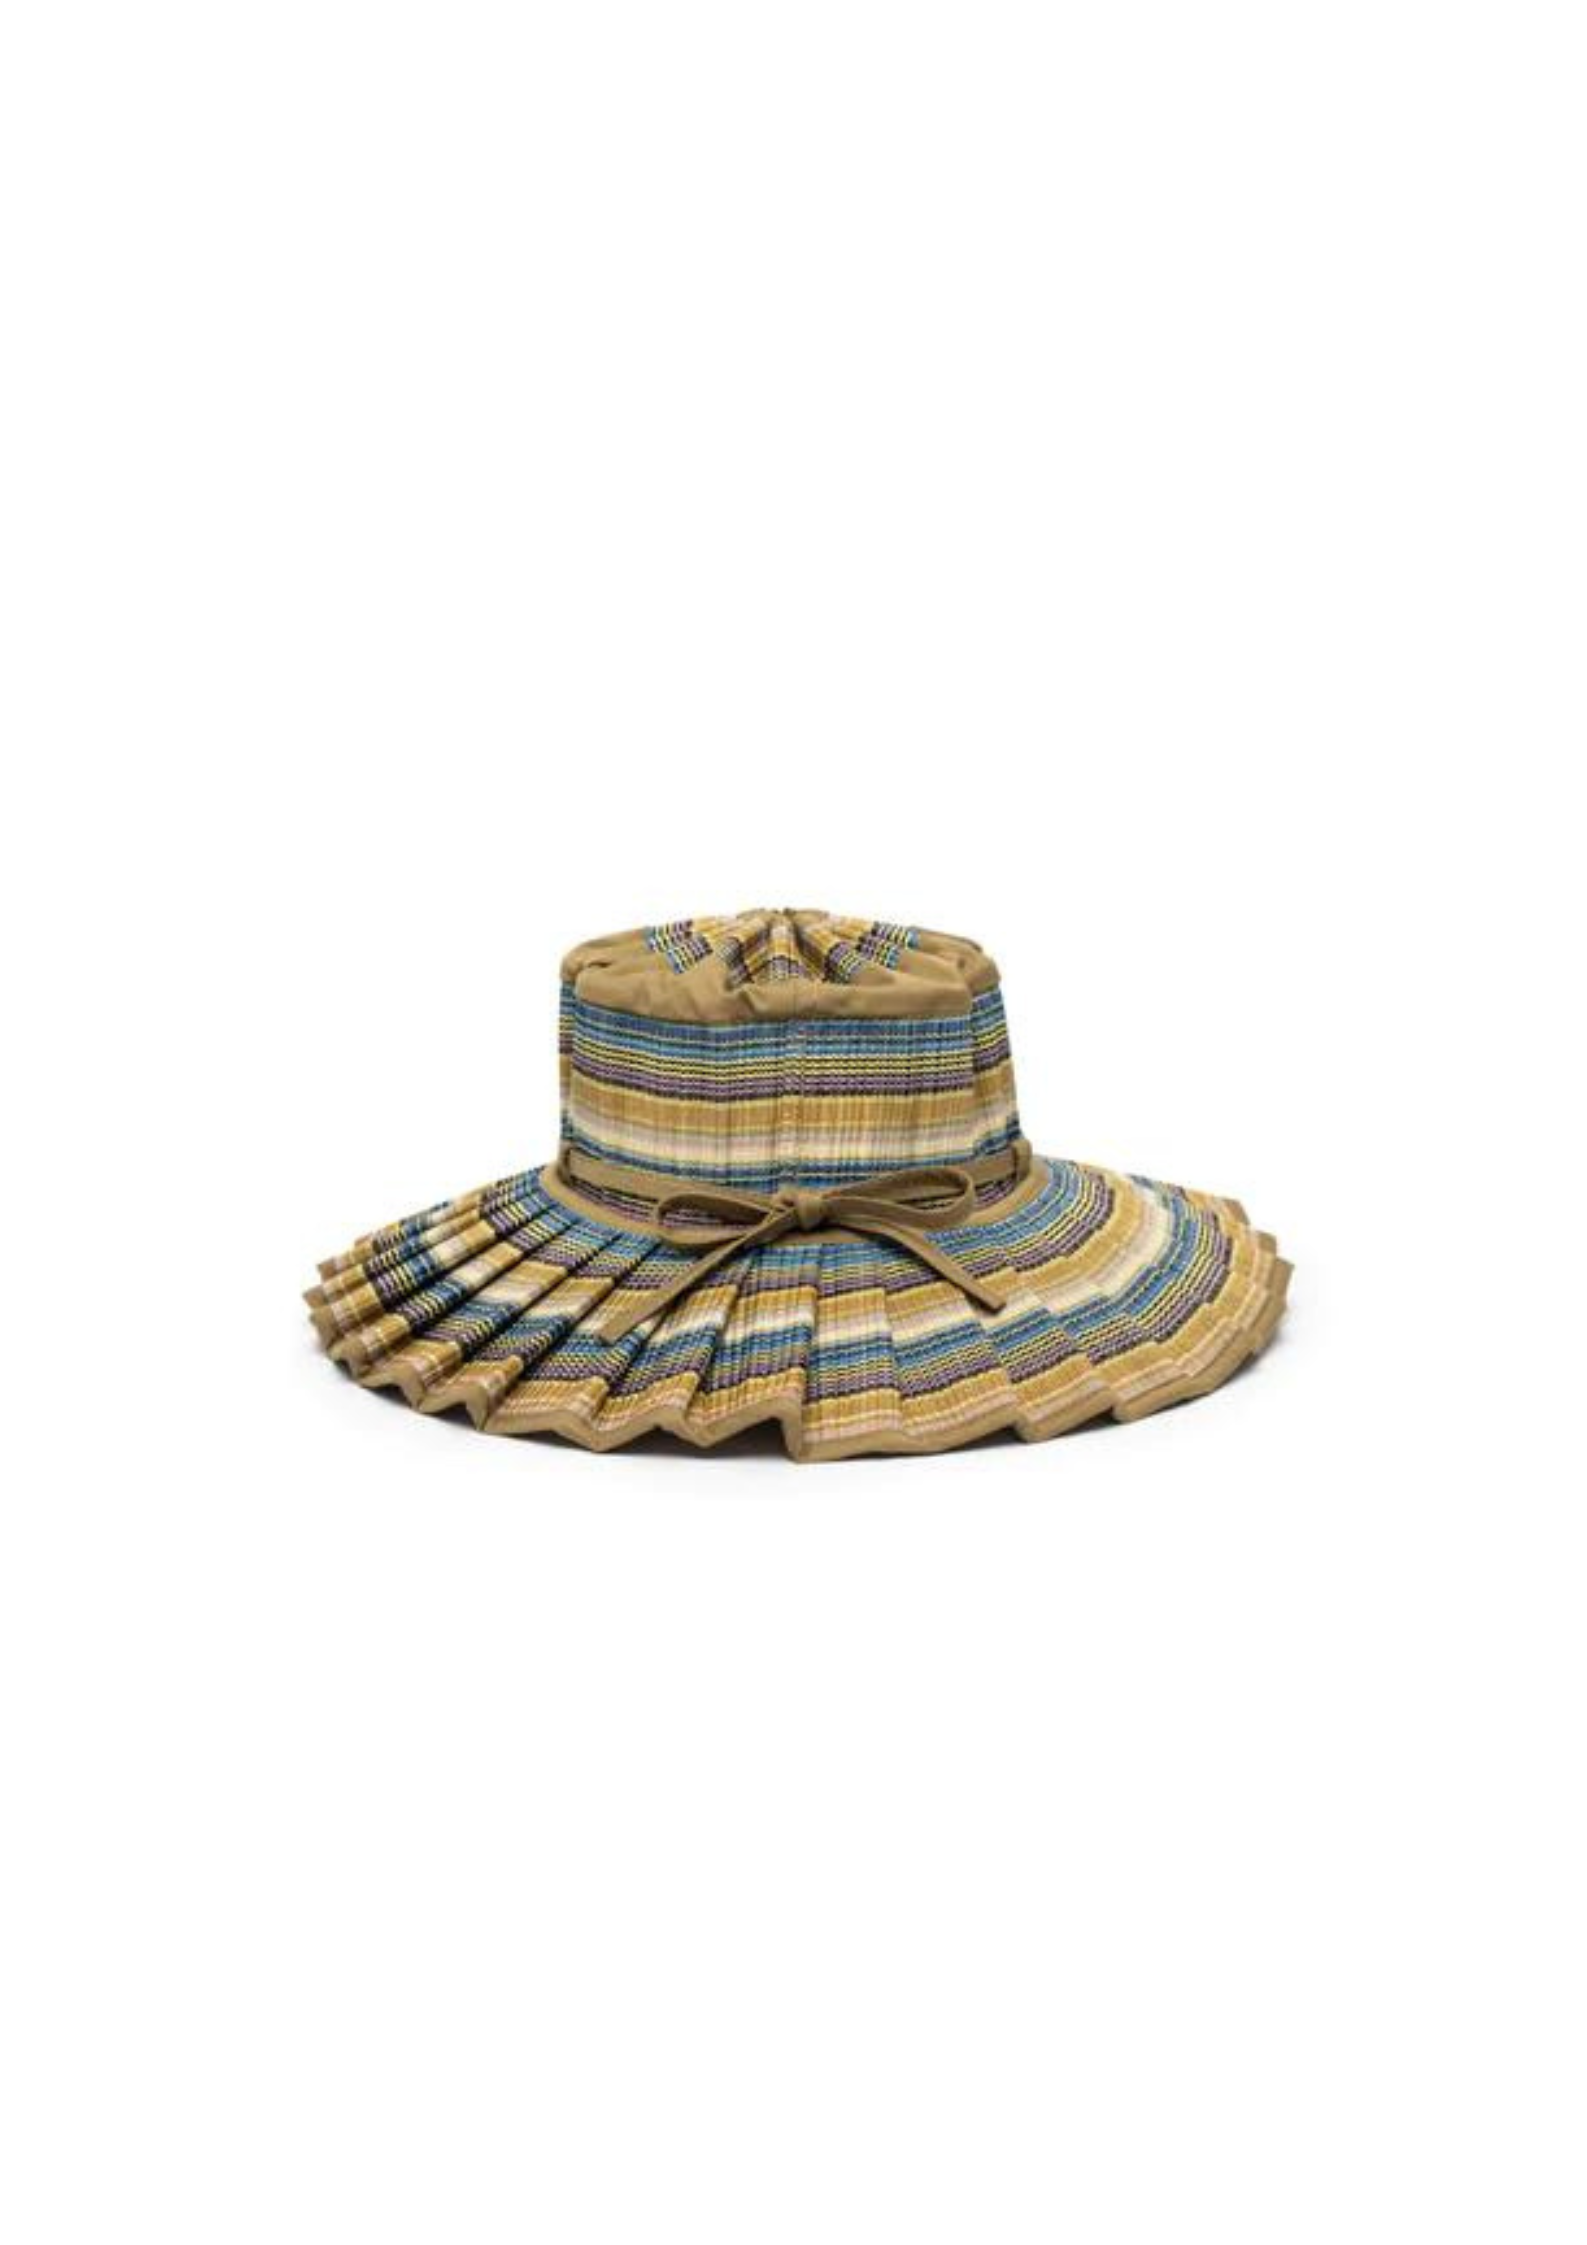 Brown Sugar Capri Hat - Child size large or adult size small - Lorna Murray